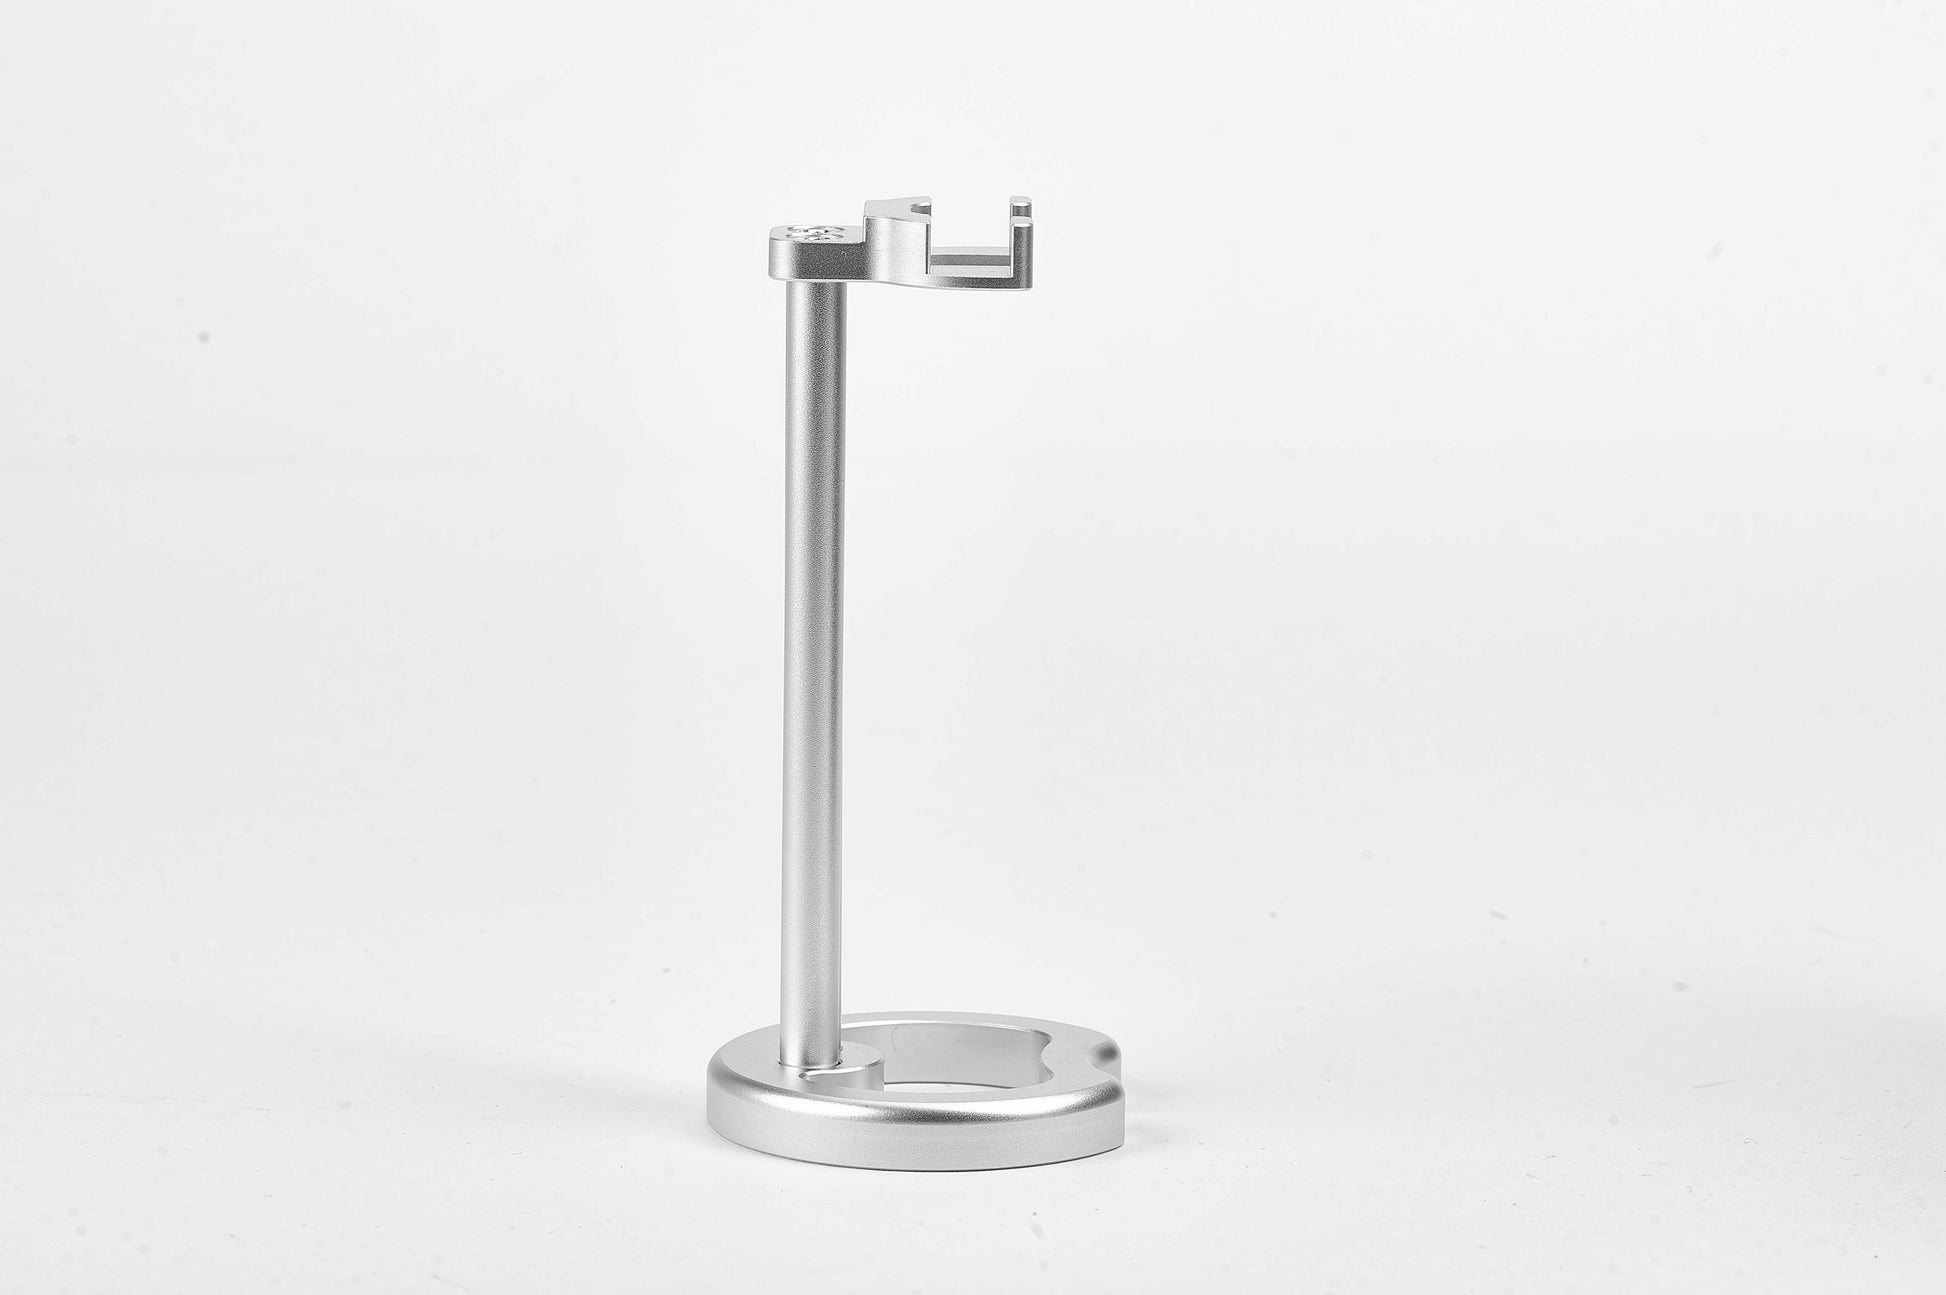 Cartridge Razor Stand - Lucid and Real